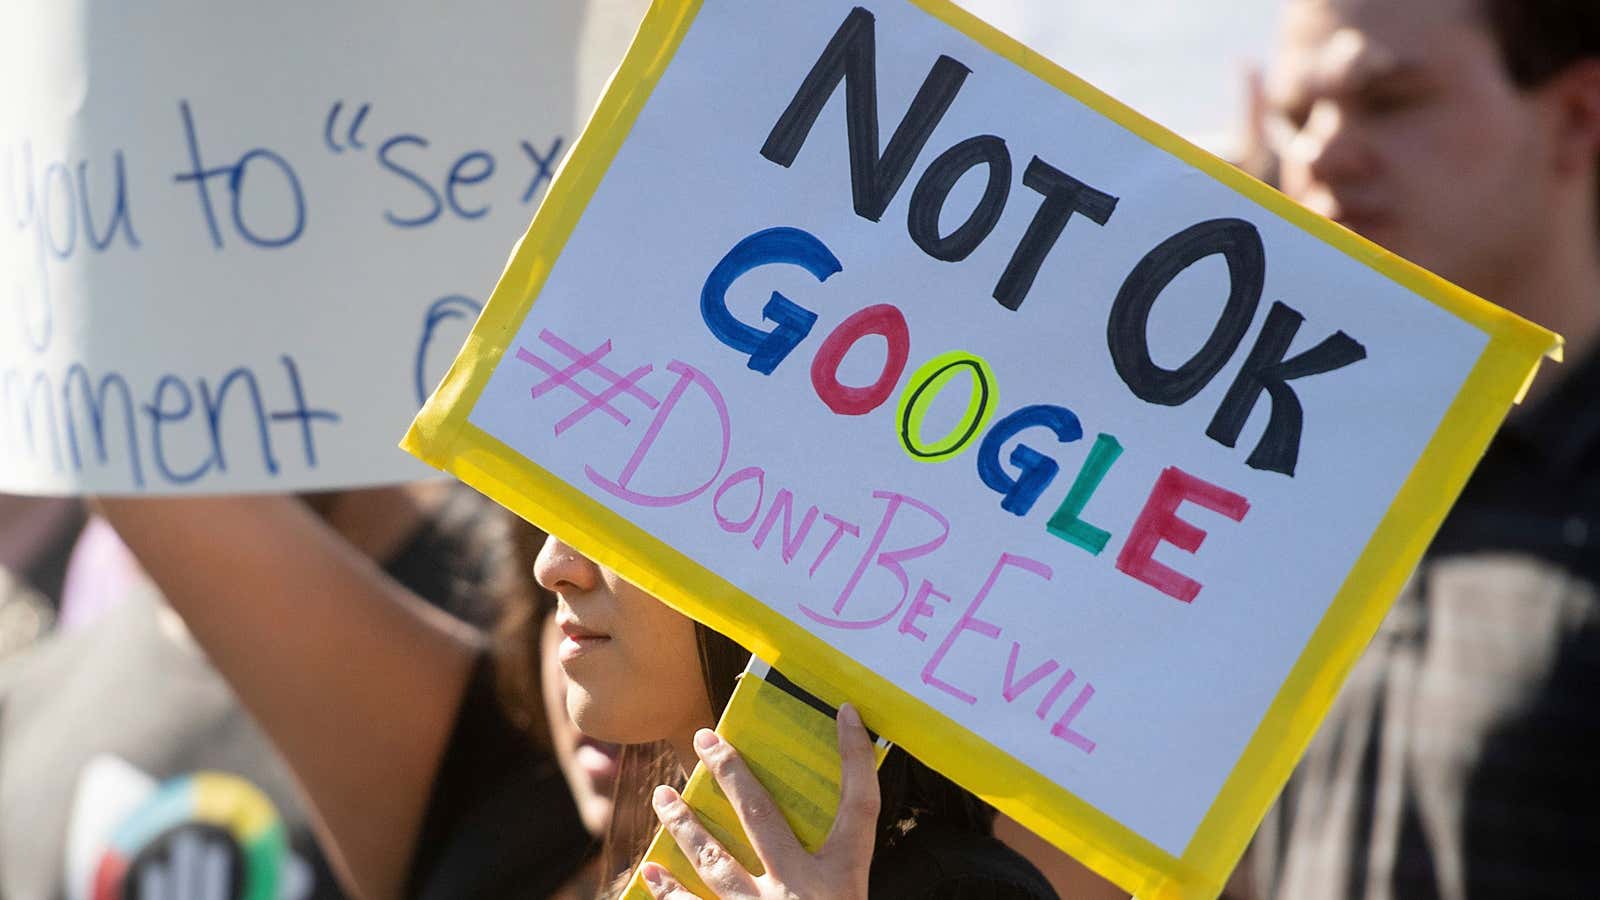 Workers protest against Google’s handling of sexual misconduct allegations.